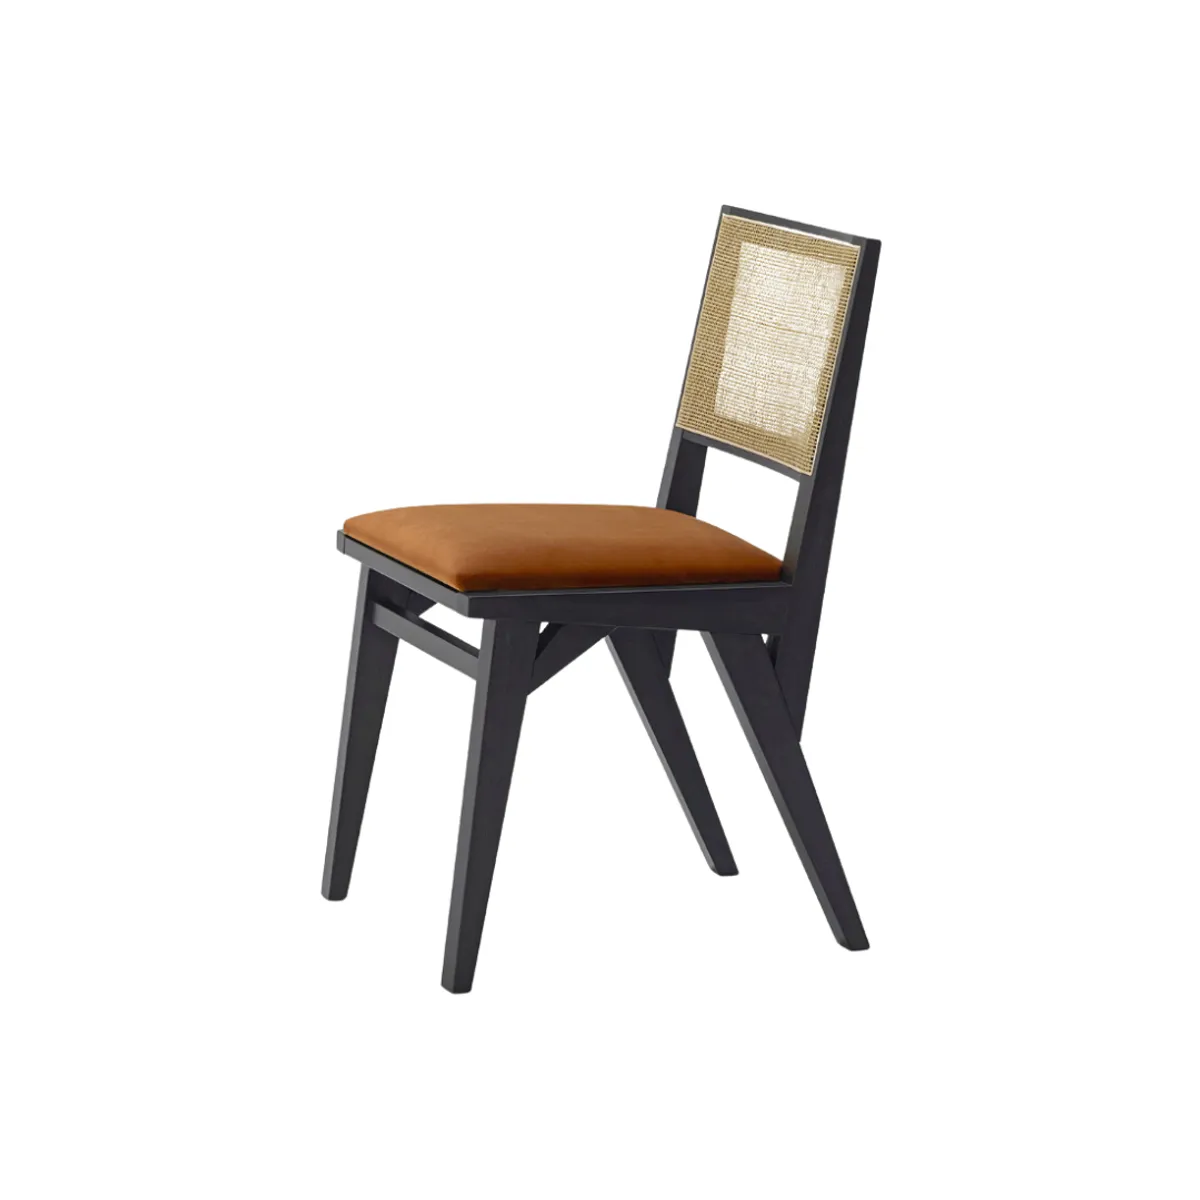 Turrioni side chair 1